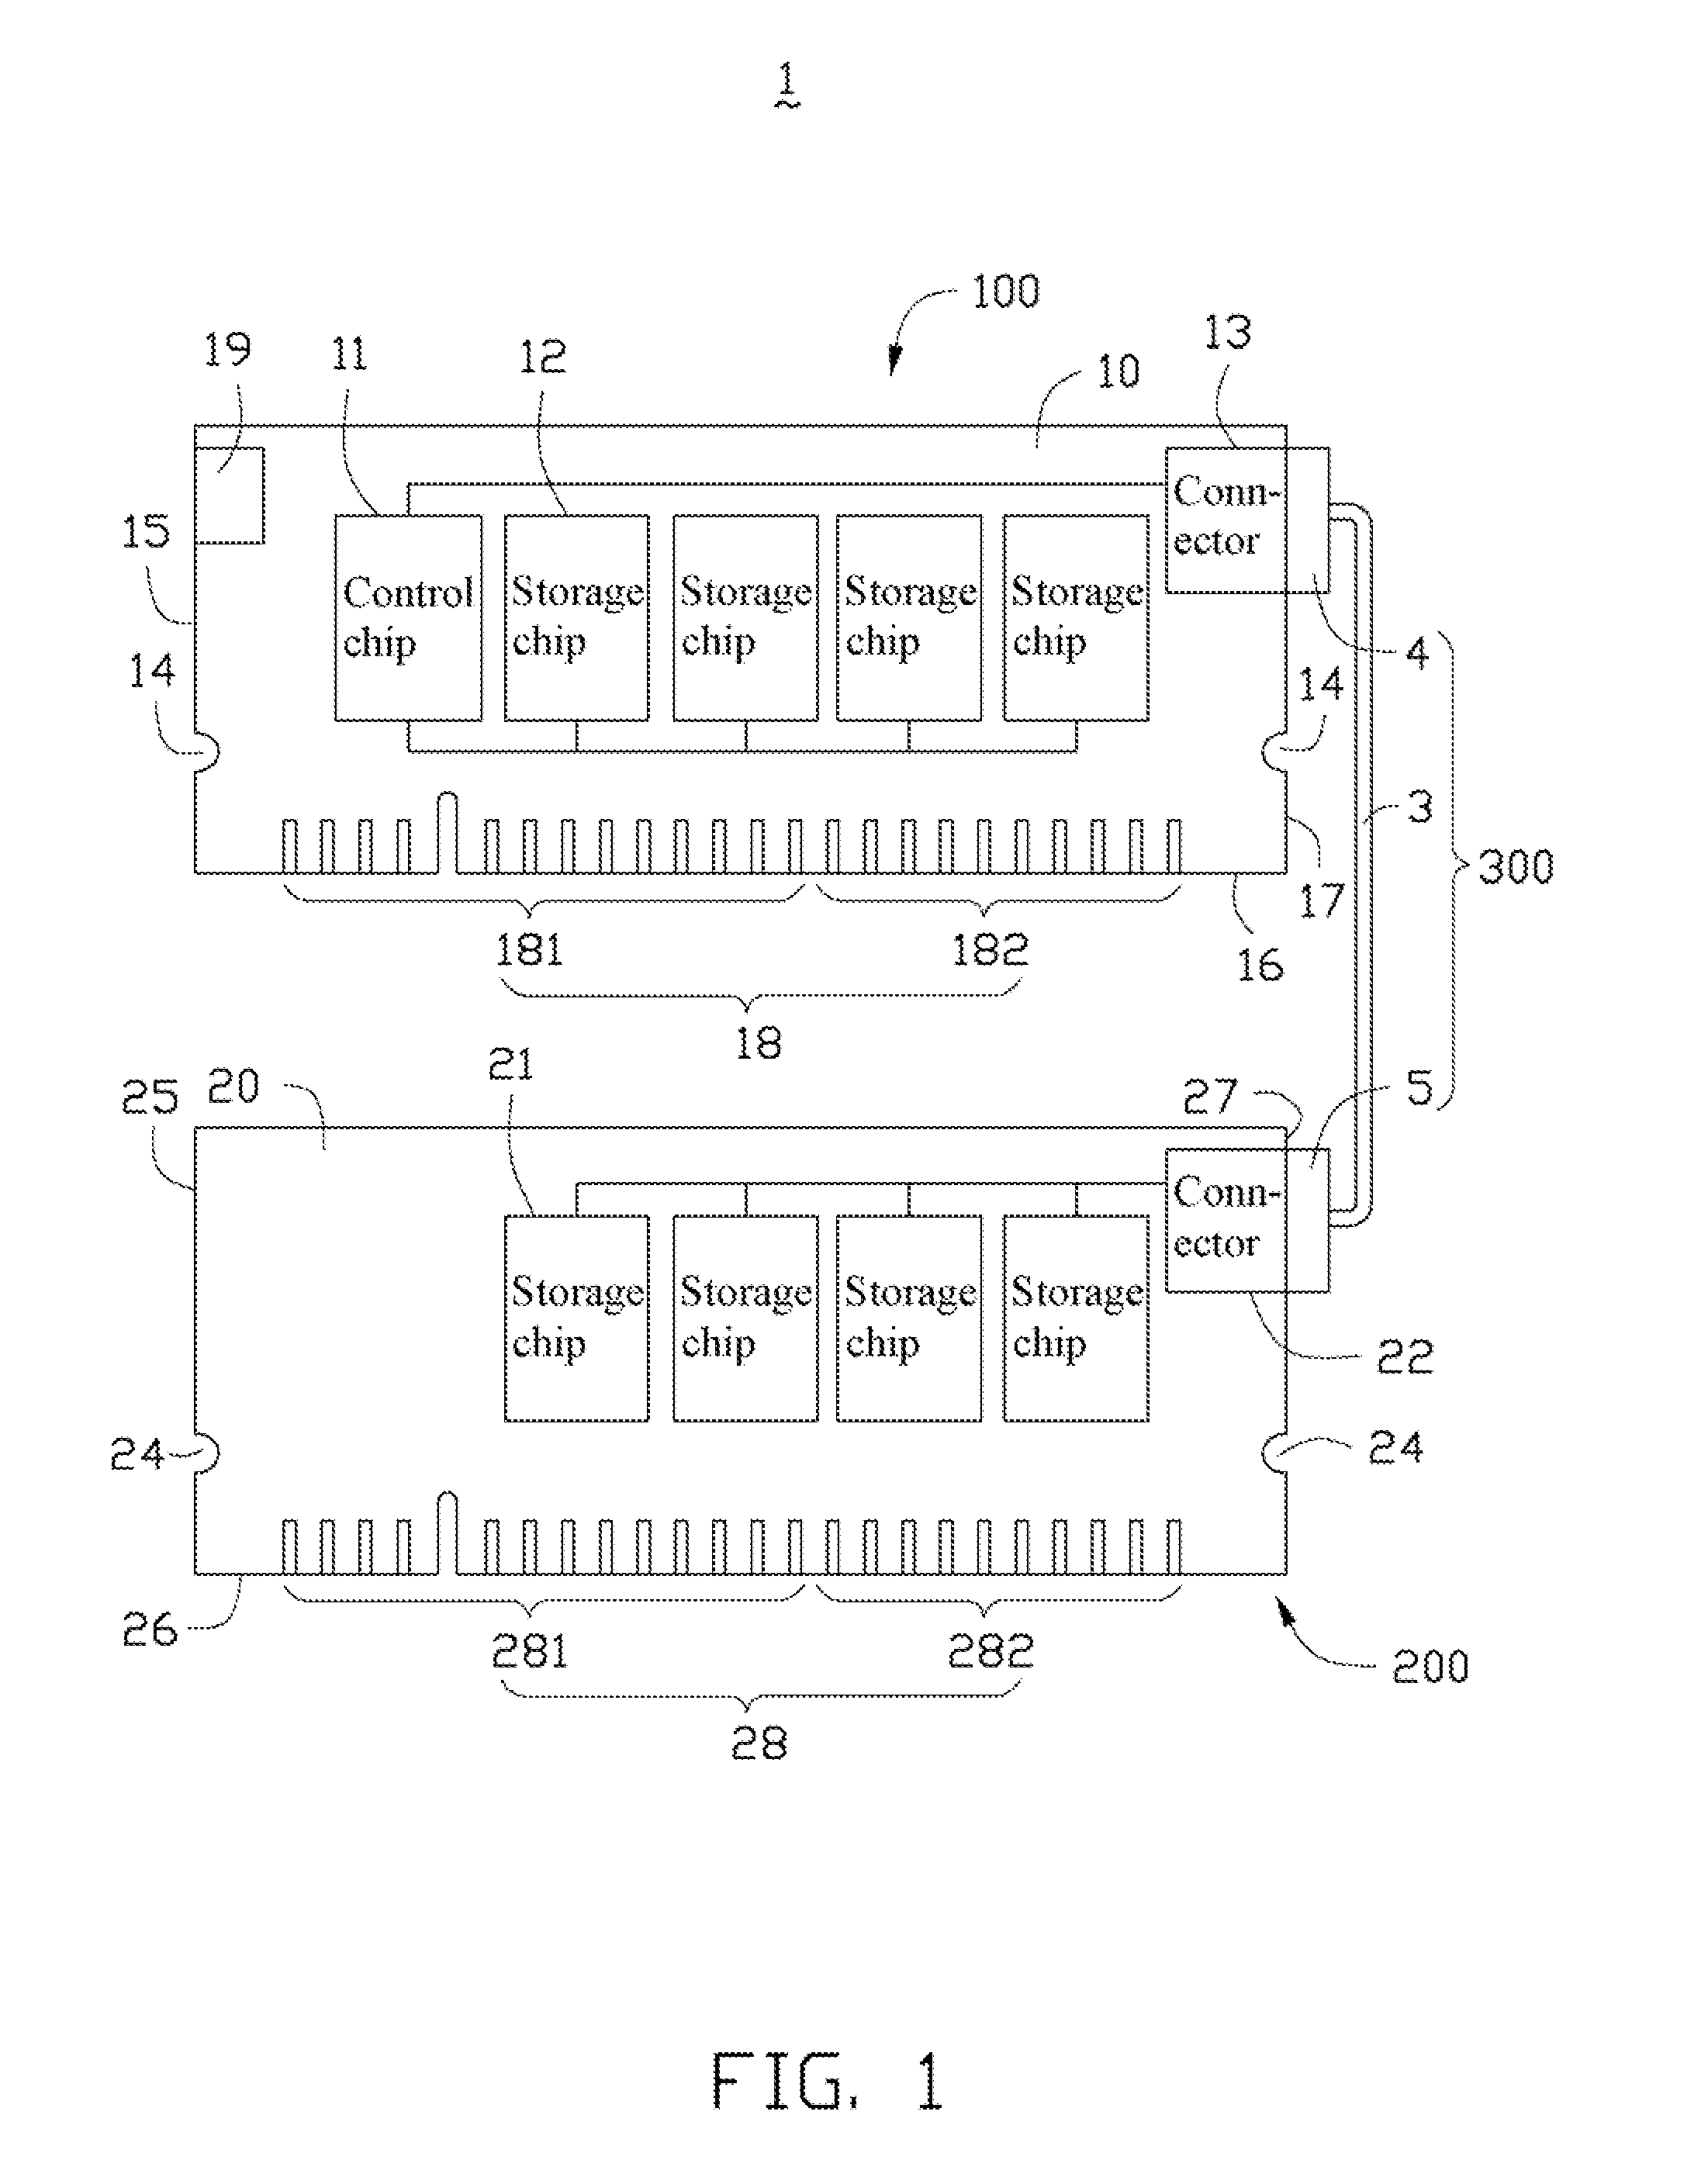 Expansion apparatus with serial advanced technology attachment dual in-line memory module